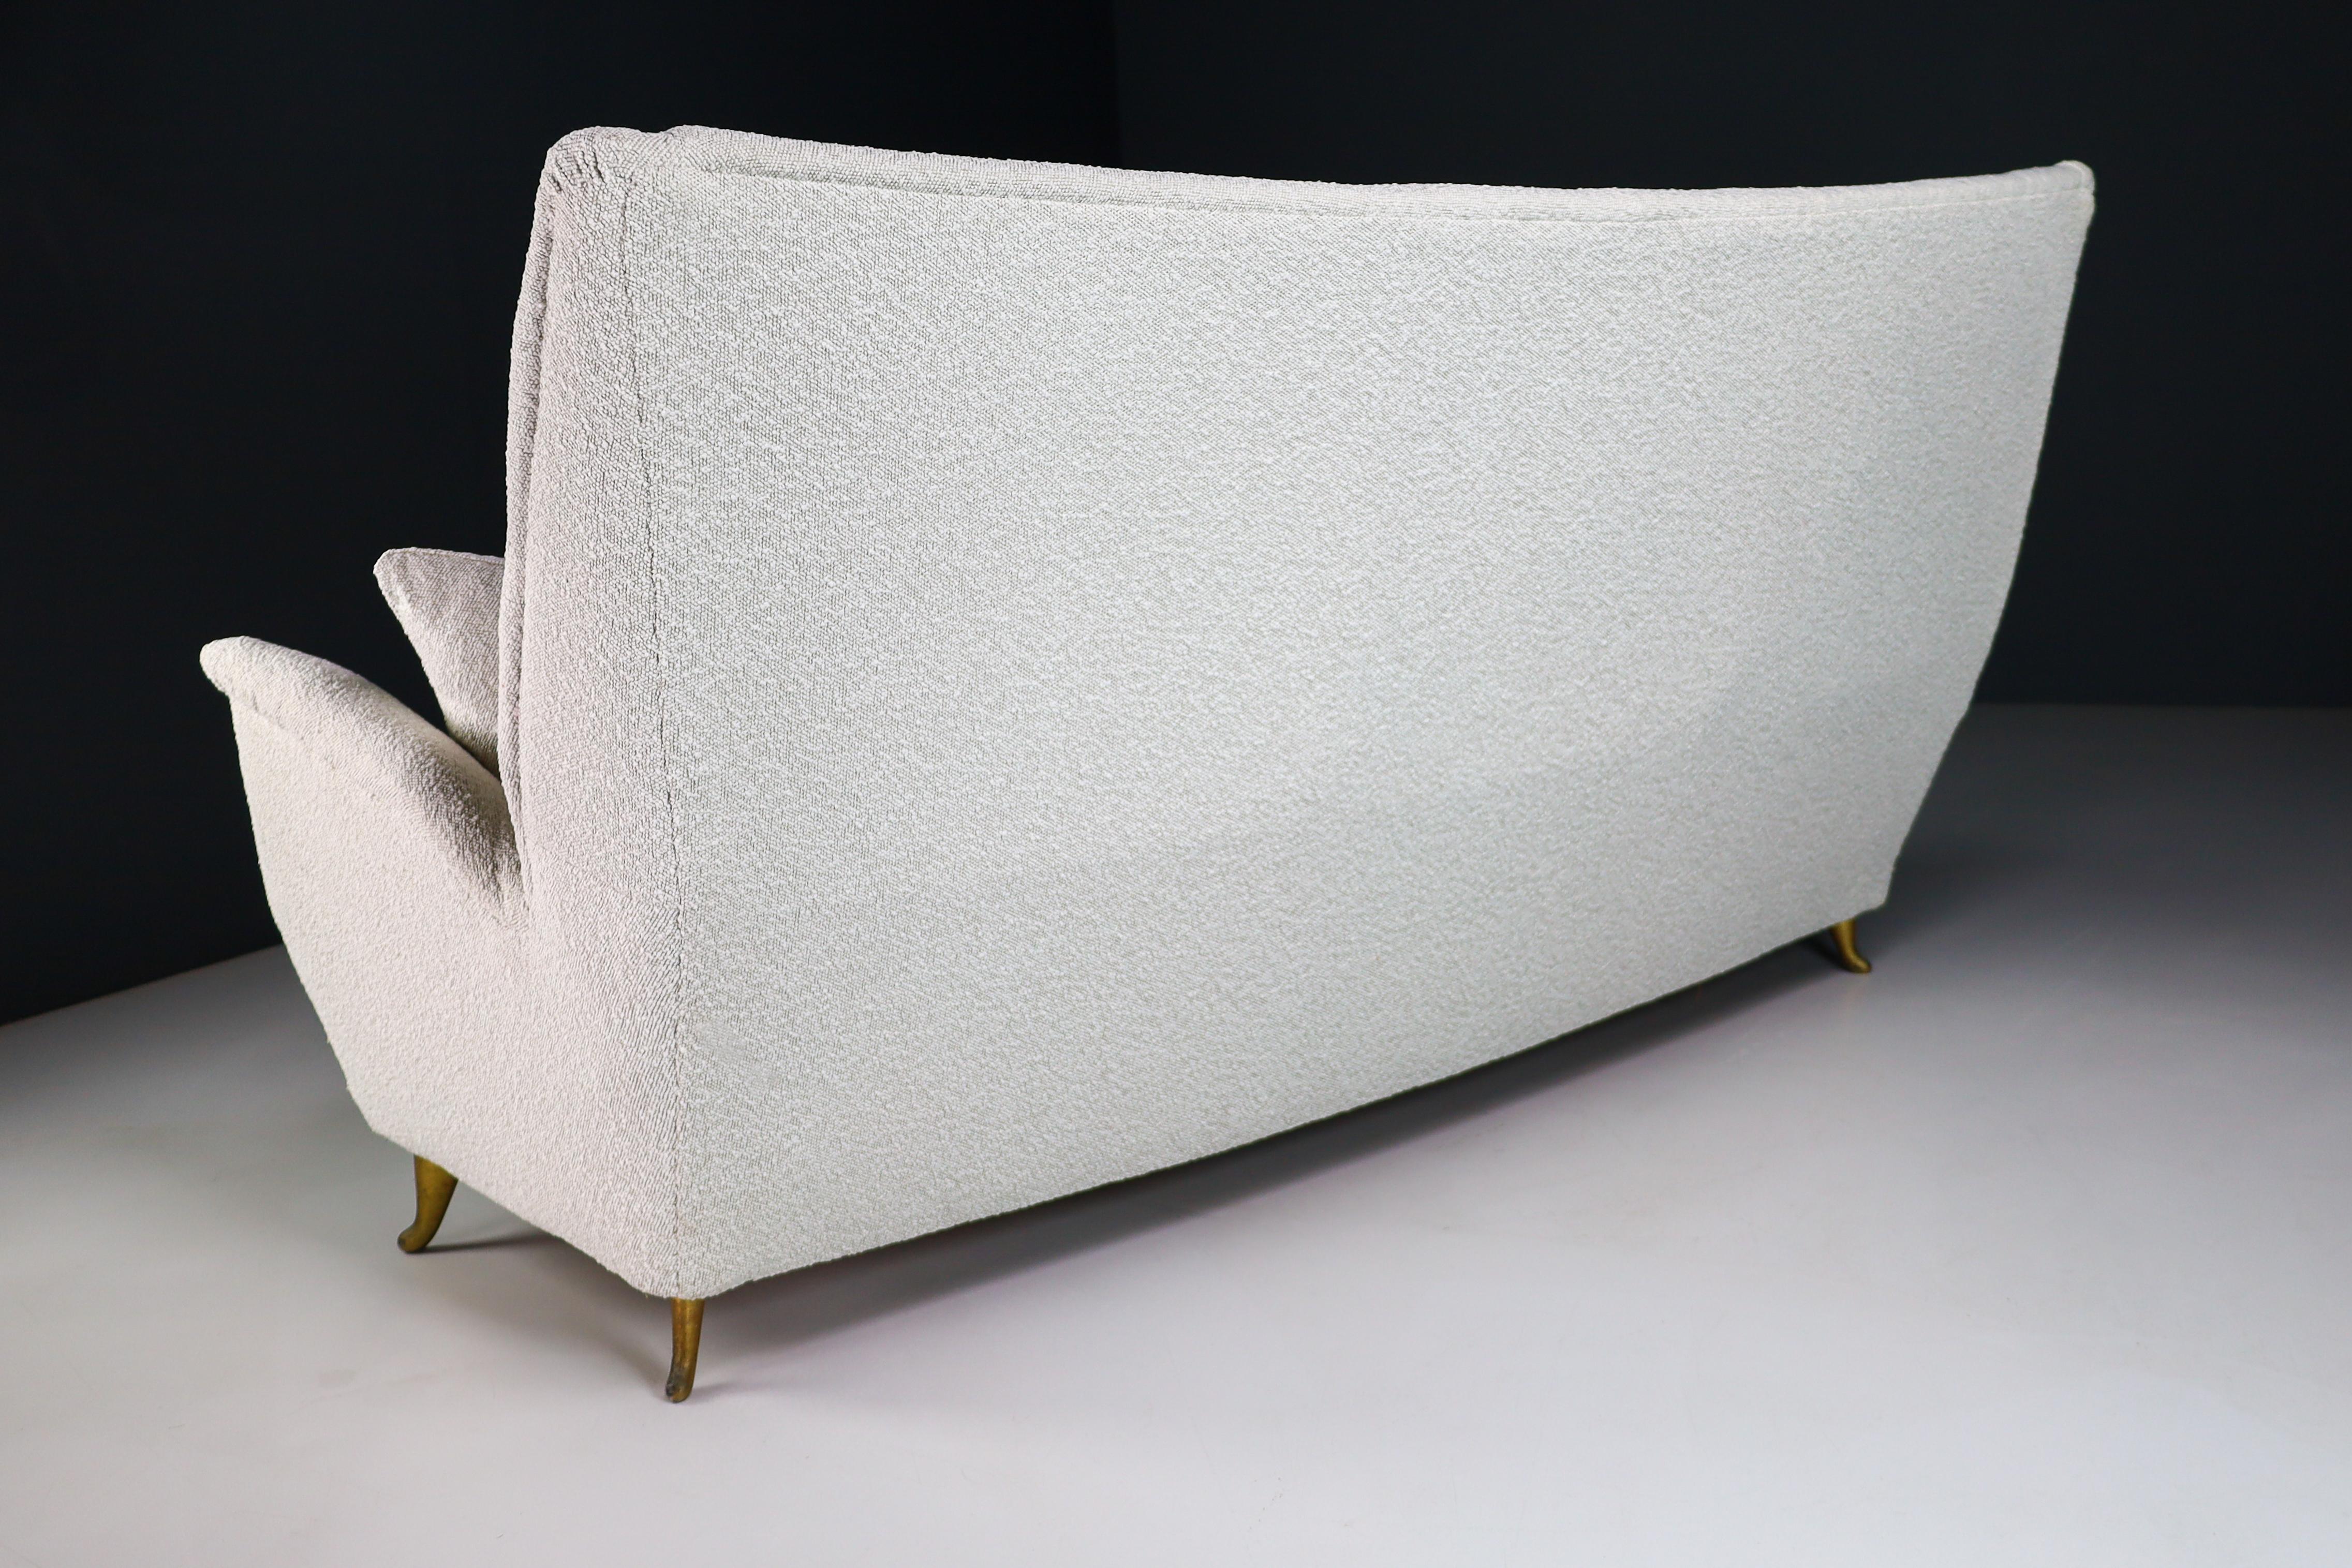 High Back Sofa By Gio Ponti For ISA Bergamo in Bouclé Fabric Upholstery 1950s For Sale 3